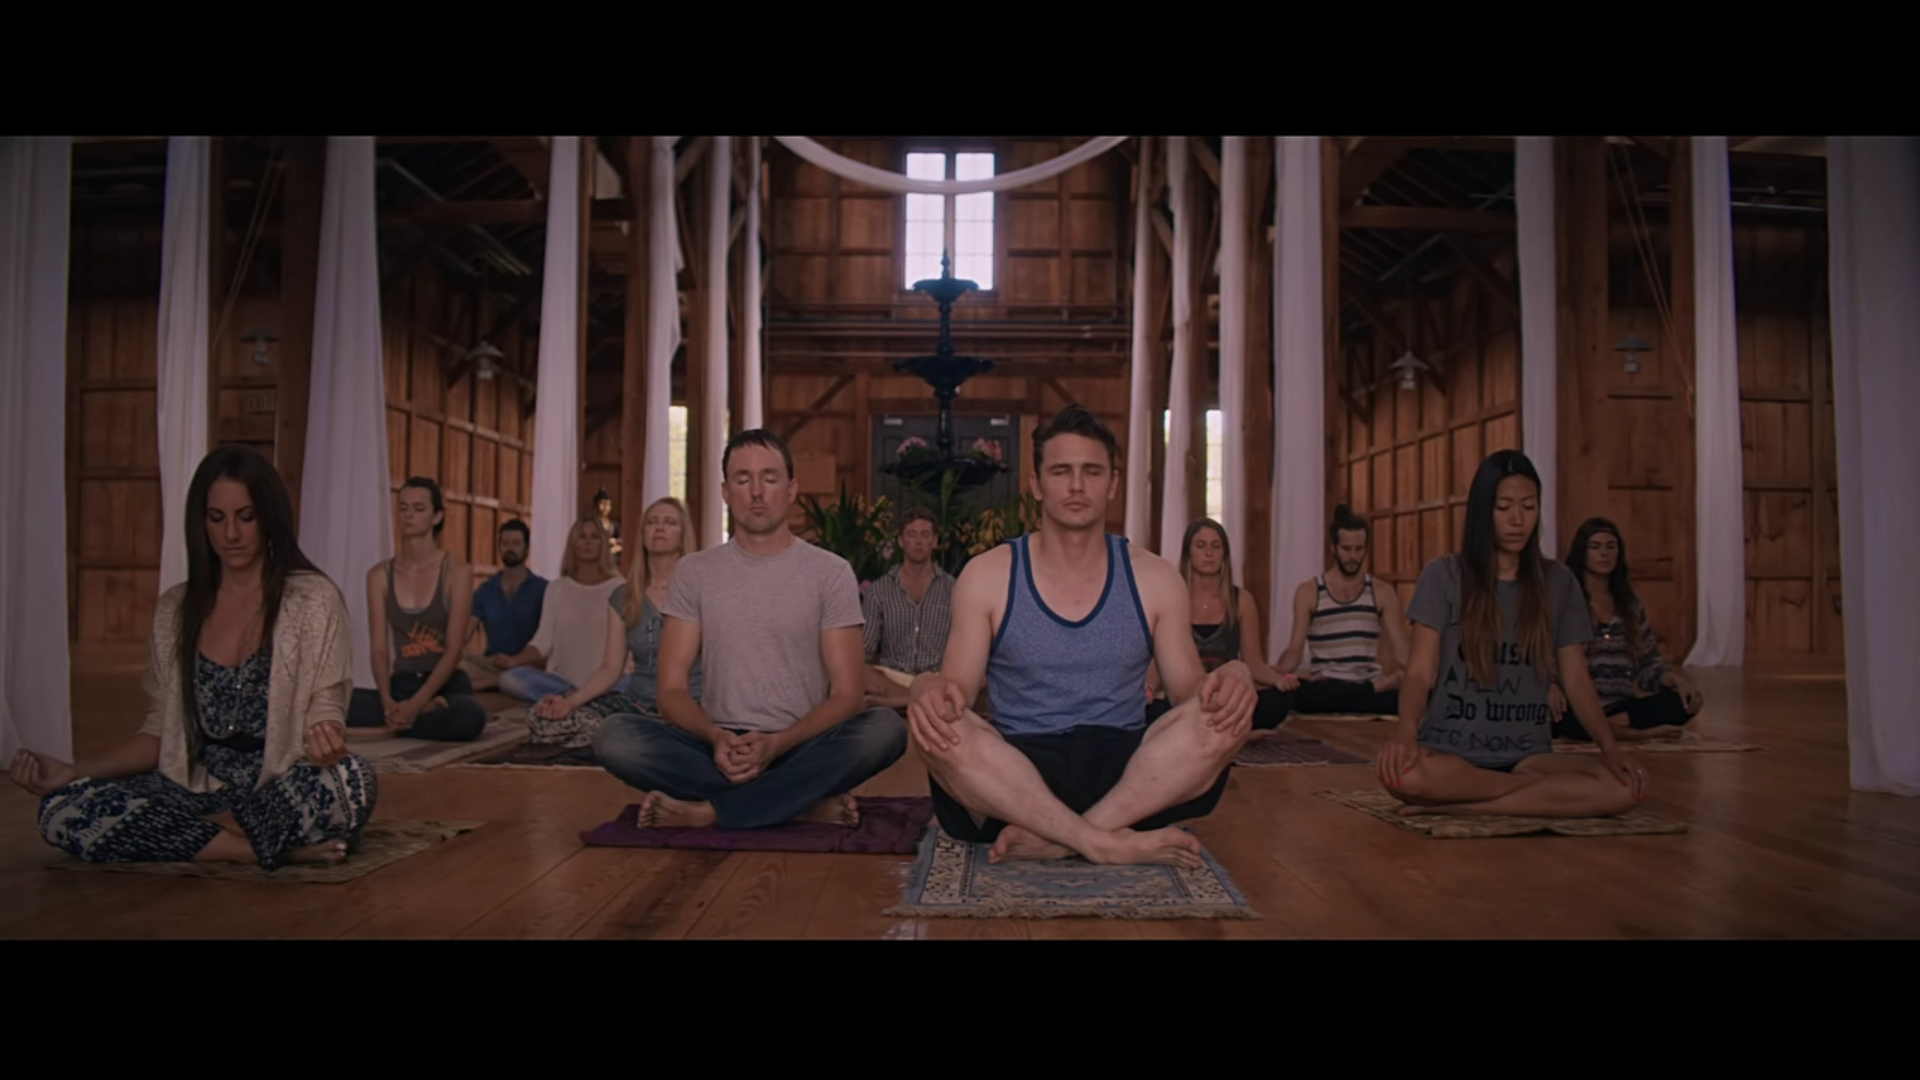 A group of people meditate on rugs in a large room with wooden floors and walls. They sit with crossed legs and eyes closed, and a man in a blue tank top and black shorts is the most prominent.